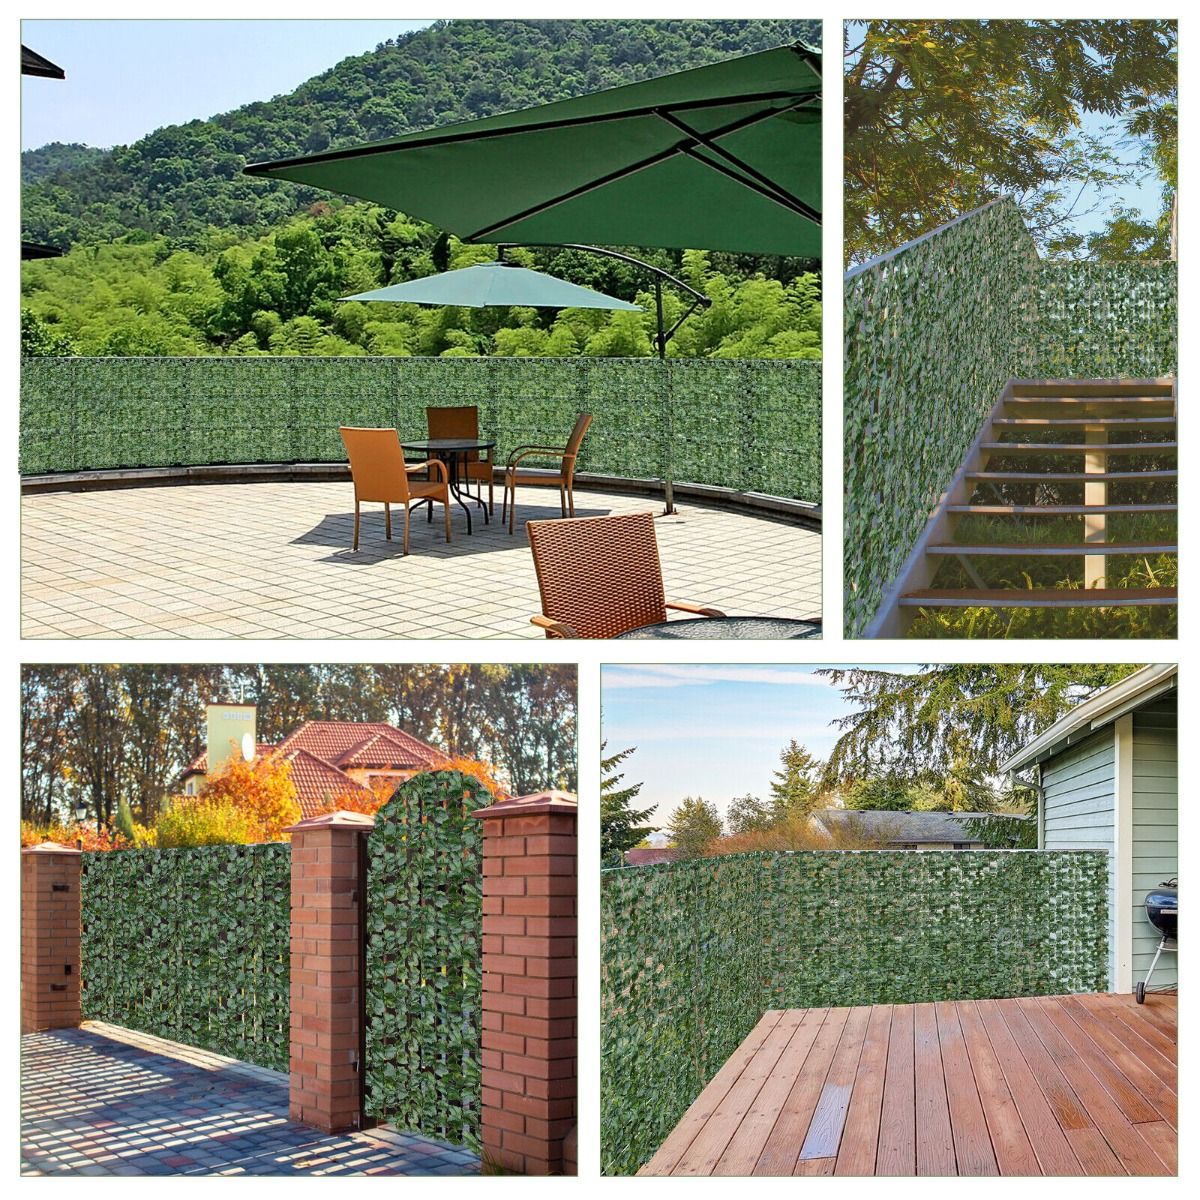 Artificial Ivy Privacy Fence Wall Screen with Zip Ties